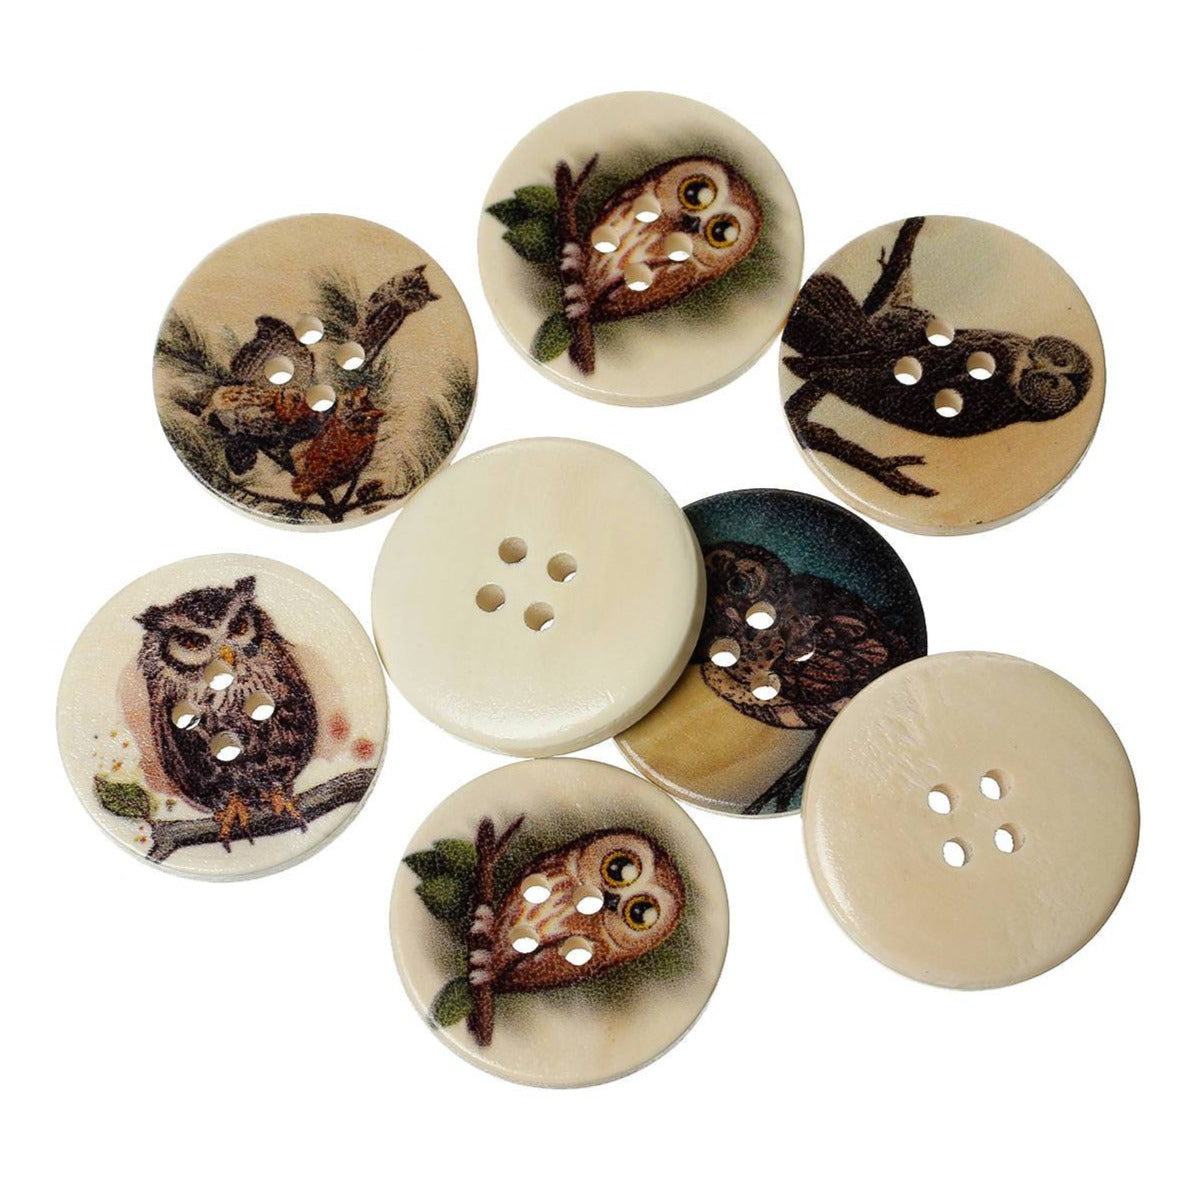 Owl wood sewing buttons - 6 Mixed Patterns craft buttons